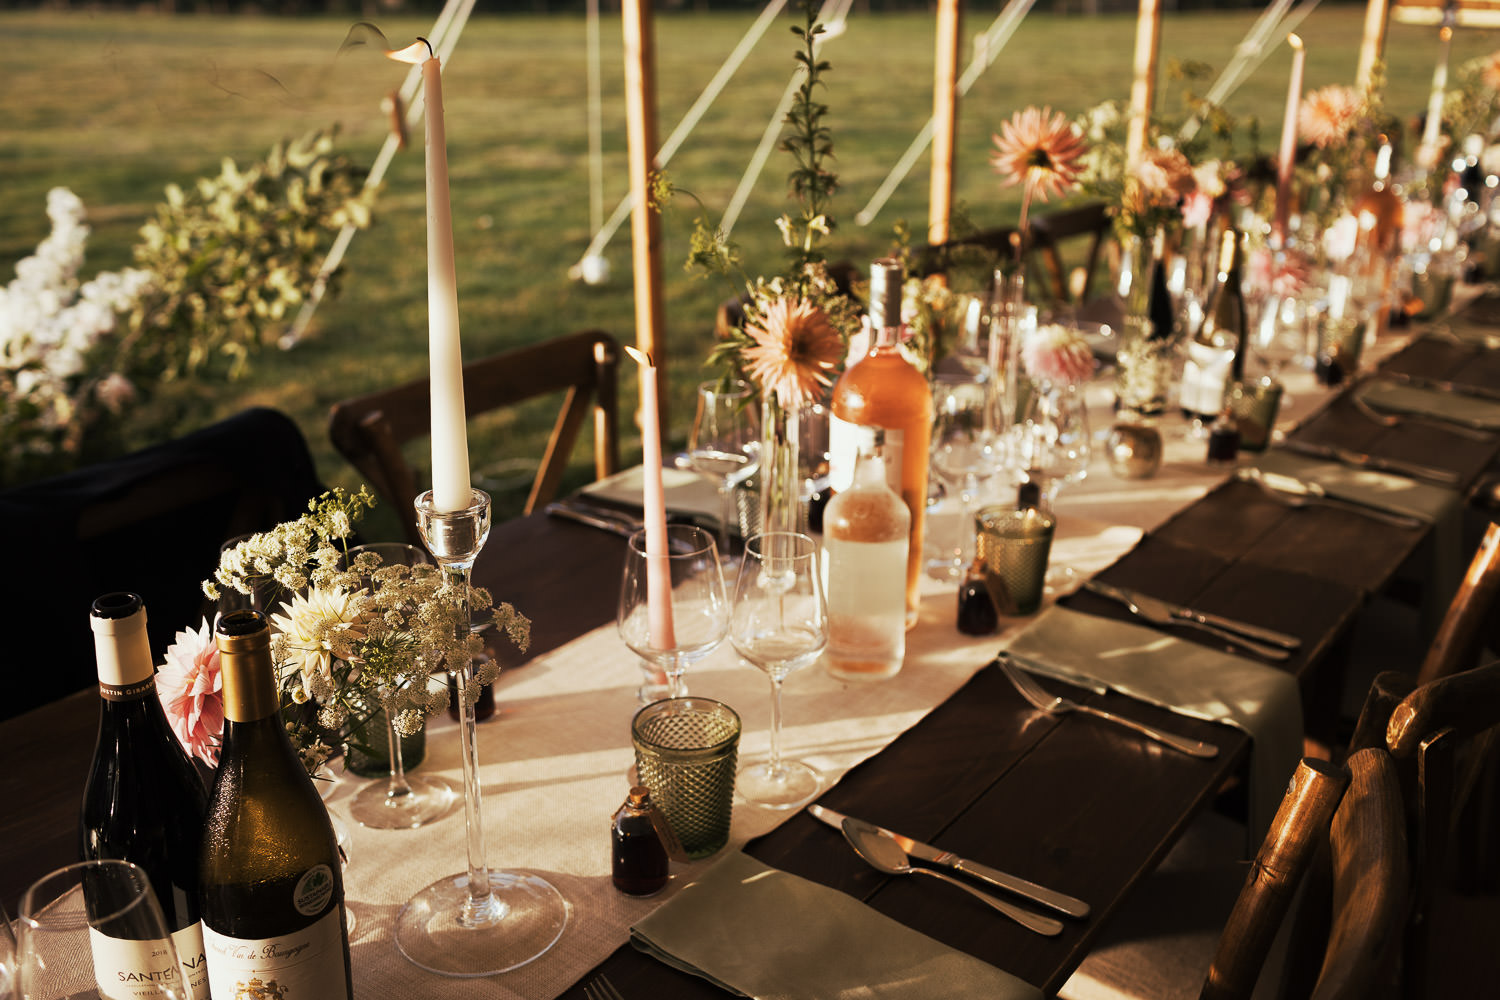 A long wooden table set with flowers, candles and wine for a wedding.

Hosted in a Sail & Peg marquee in the garden of Wellinditch Farmhouse. This home-hosted wedding near South Woodham Ferrers was by local documentary photographer Tracy.